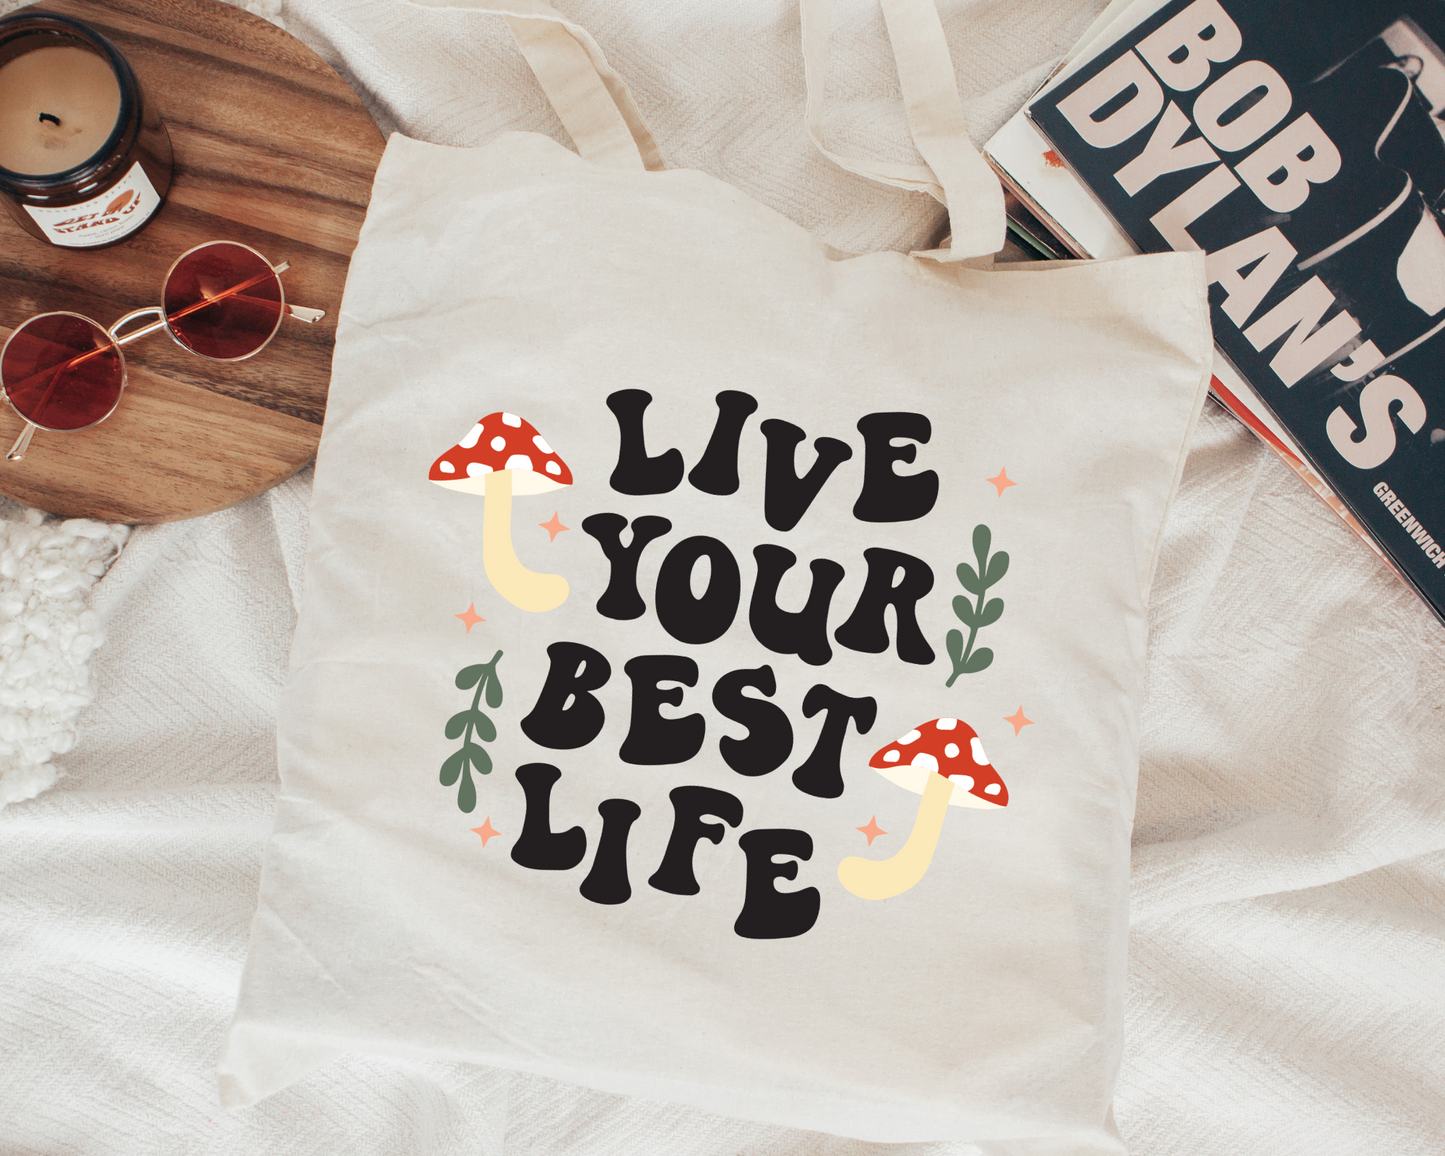 FREE Live Your Best Life SVG | Mushroom Quote SVG